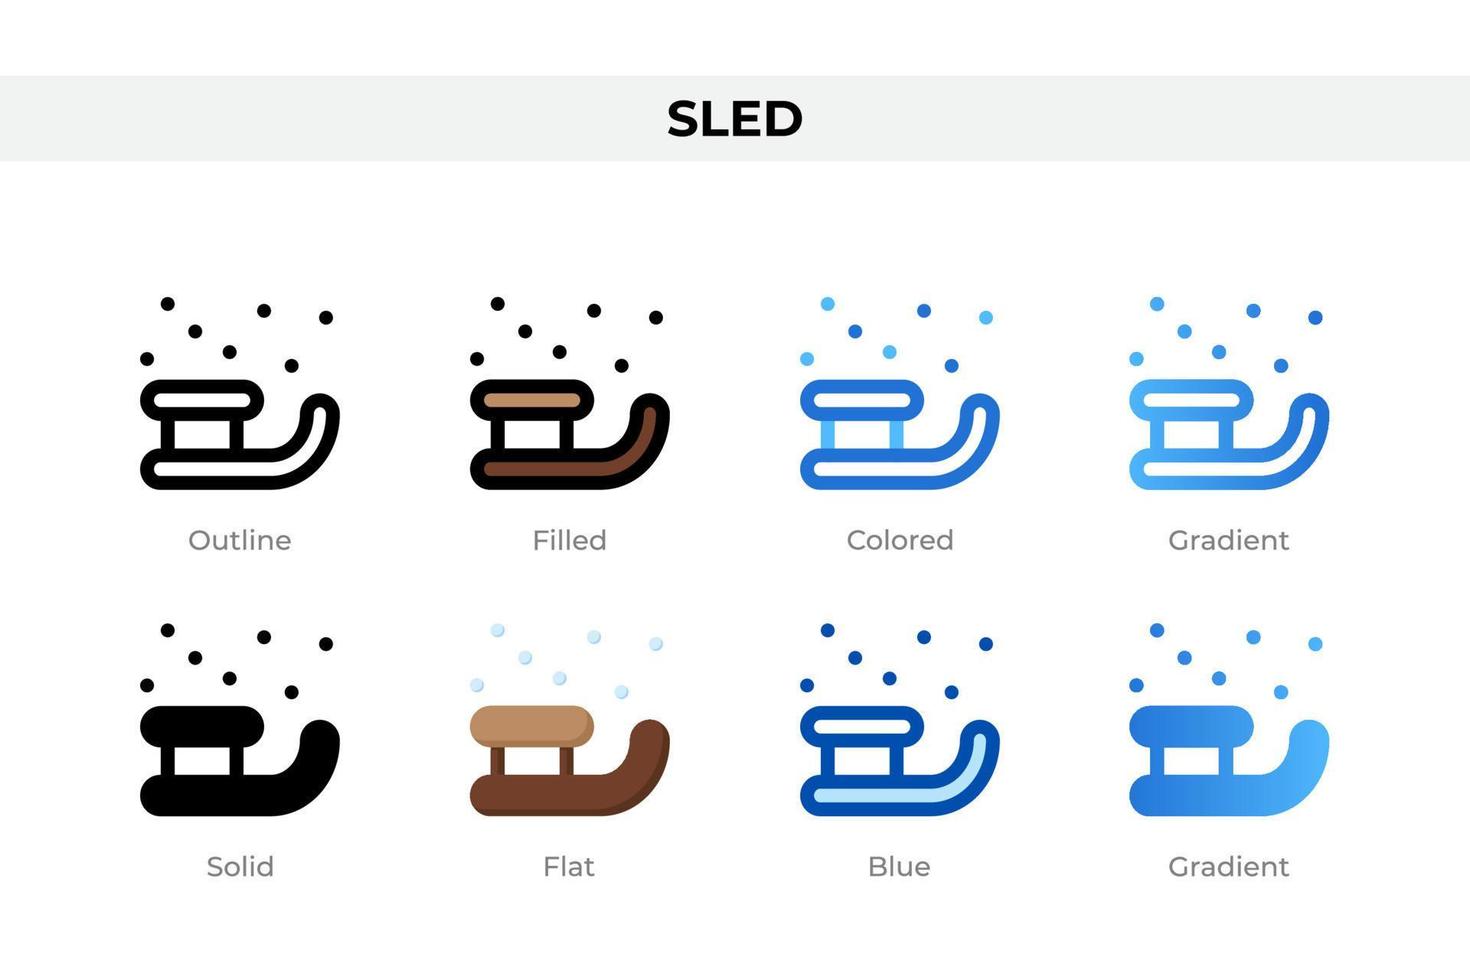 Sled icons in different style. Sled icons set. Holiday symbol. Different style icons set. Vector illustration